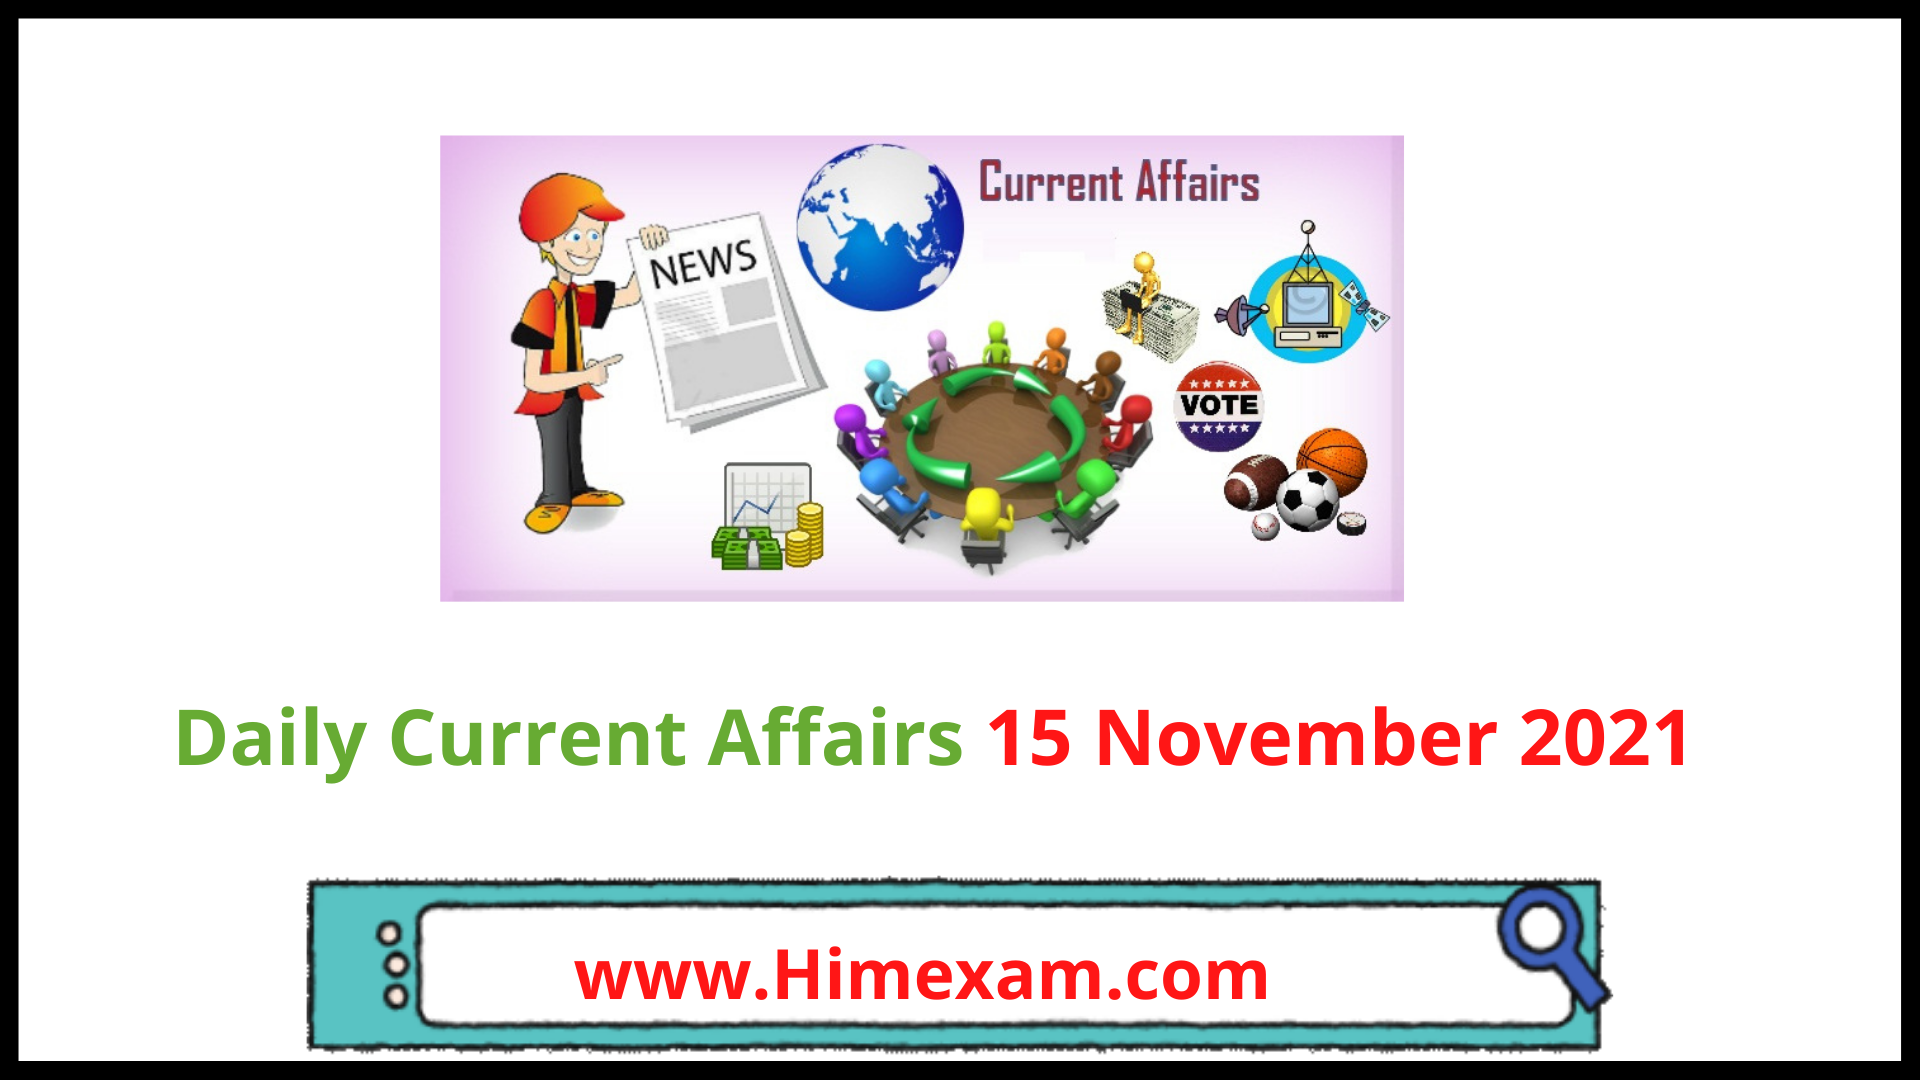 Daily Current Affairs 15 November 2021